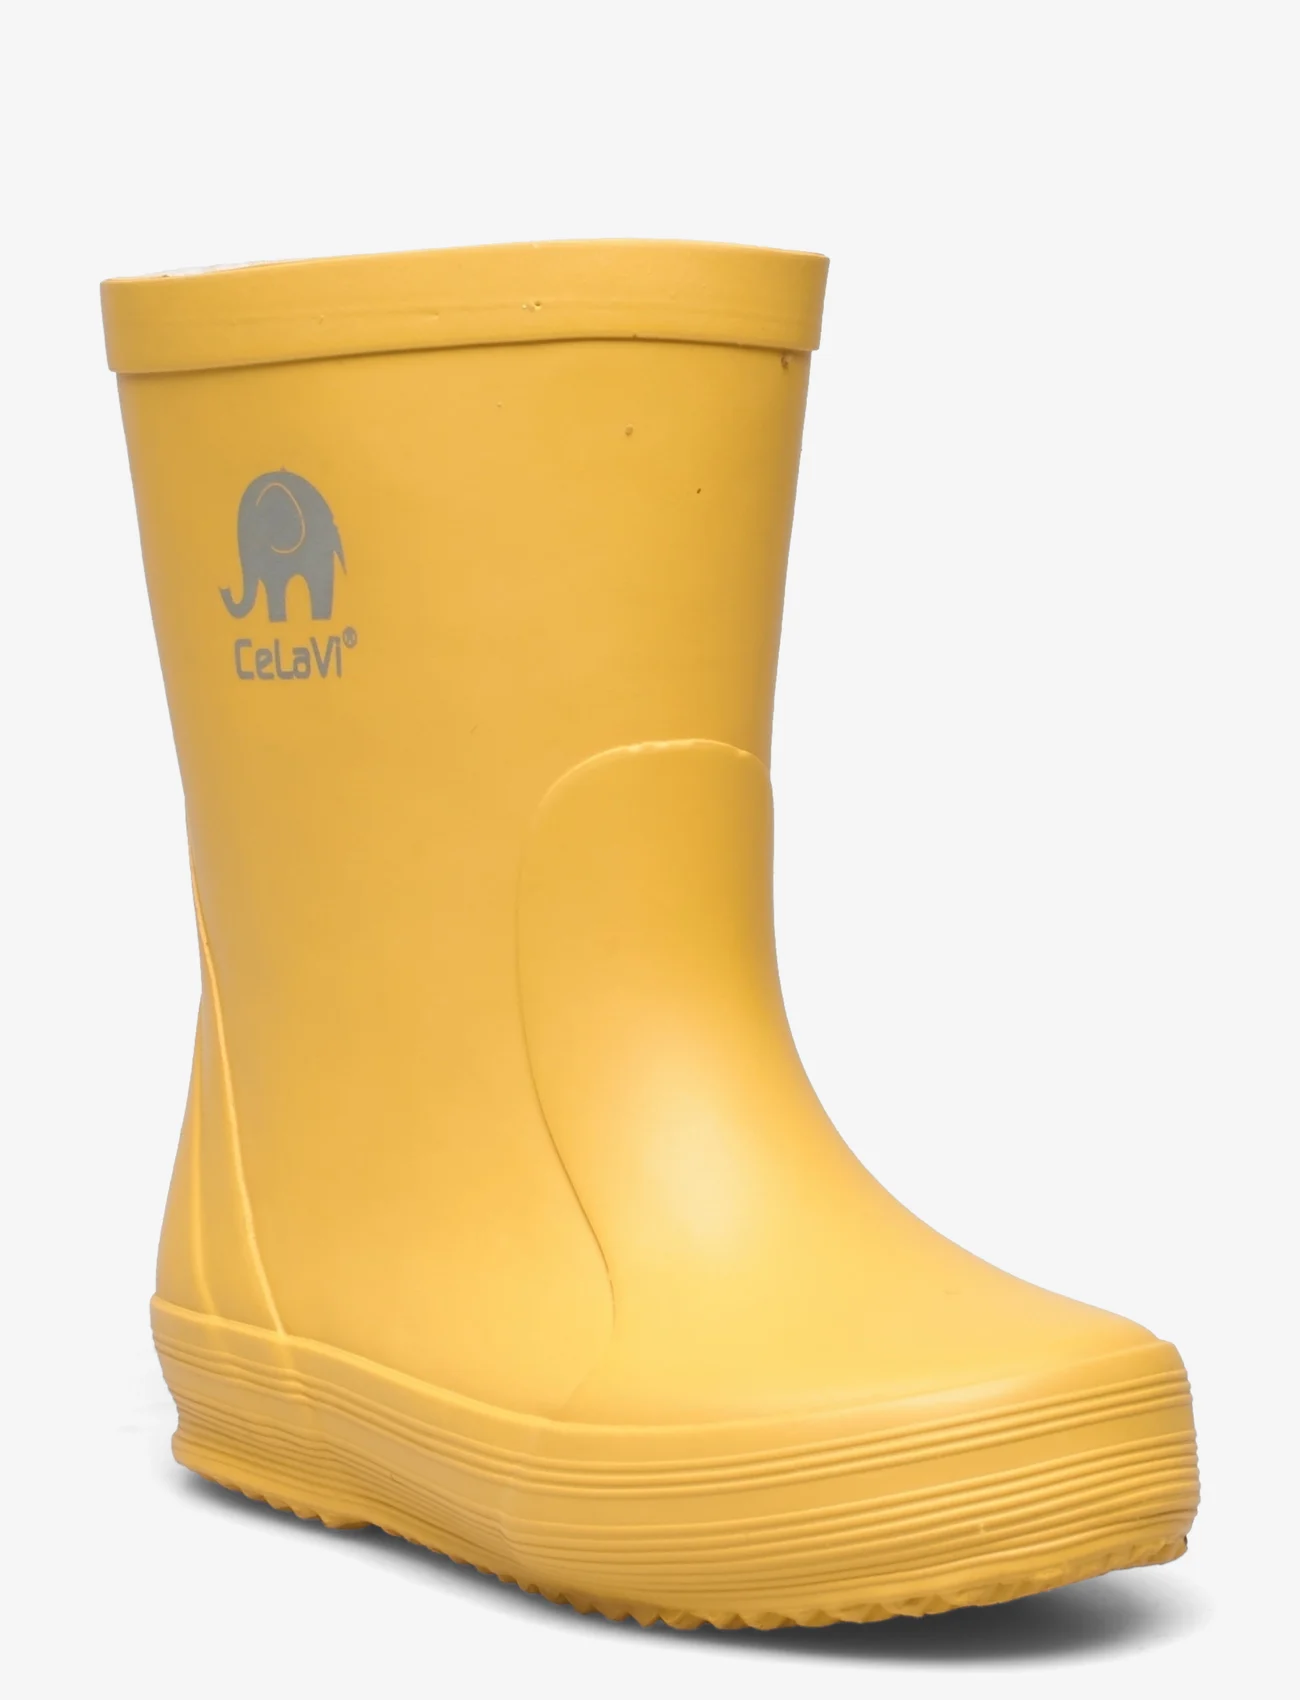 CeLaVi - Basic wellies -solid - unlined rubberboots - mineral yellow - 0